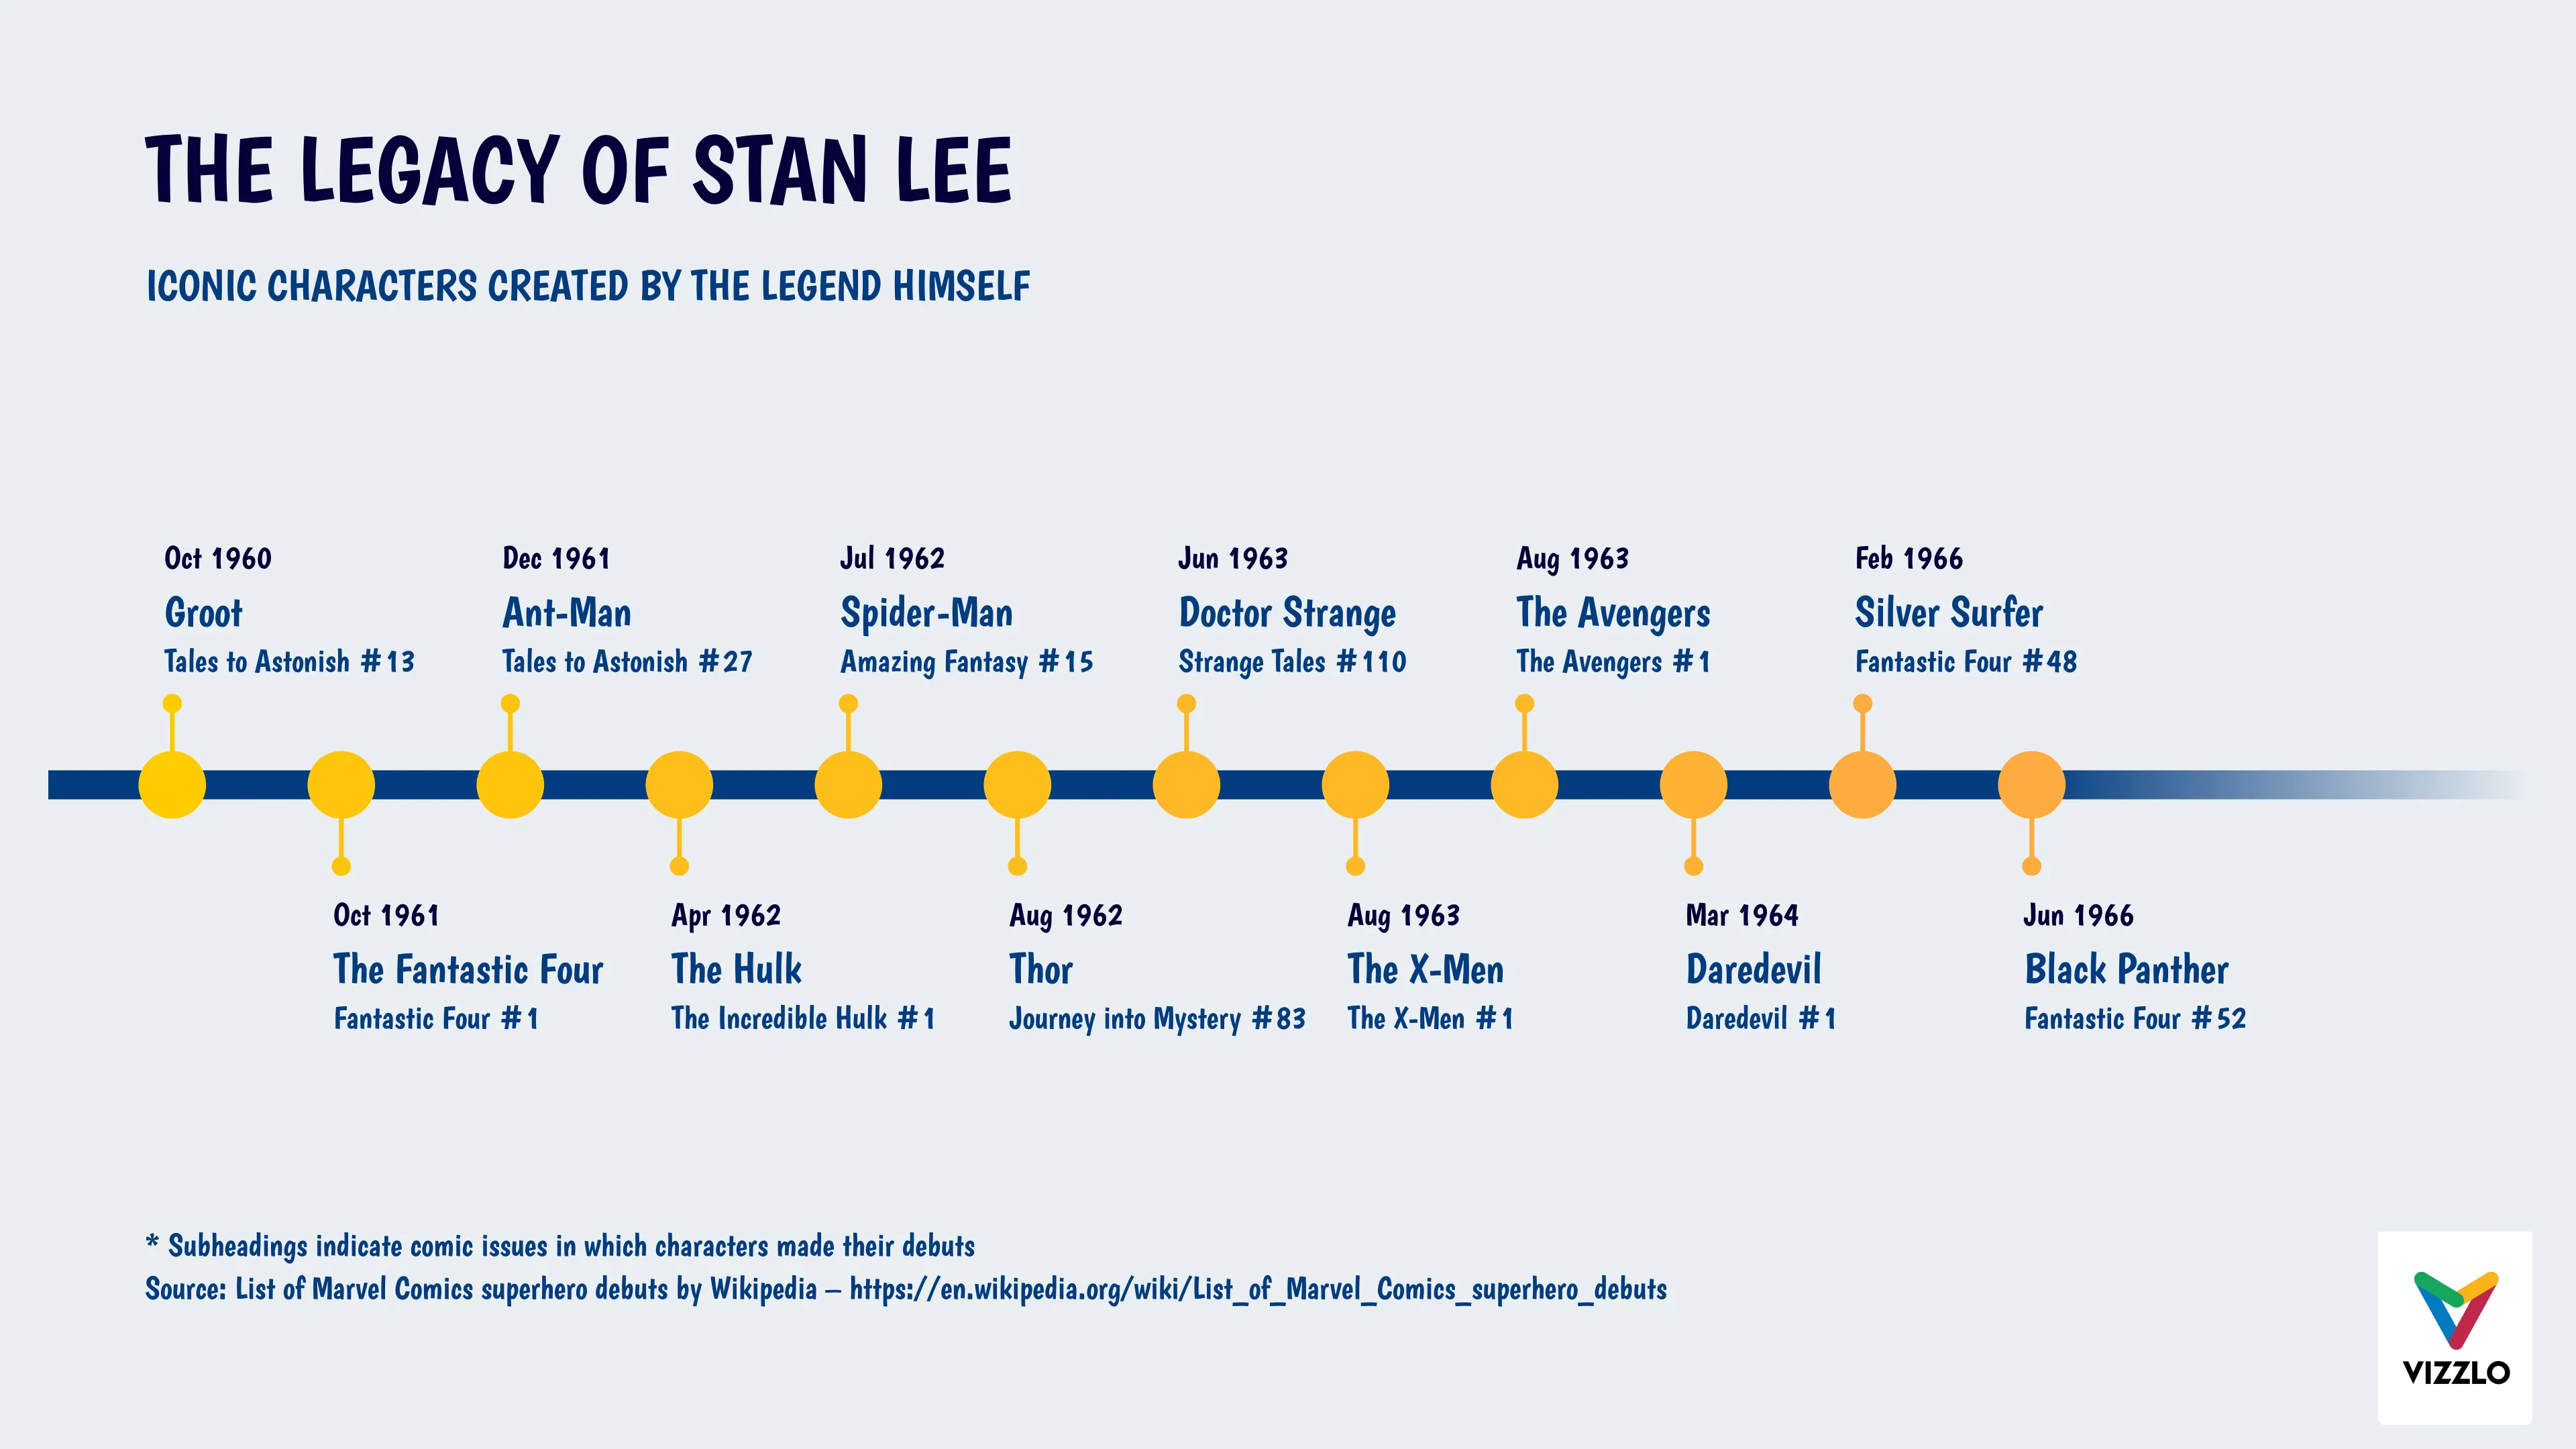 THE LEGACY OF STAN LEE